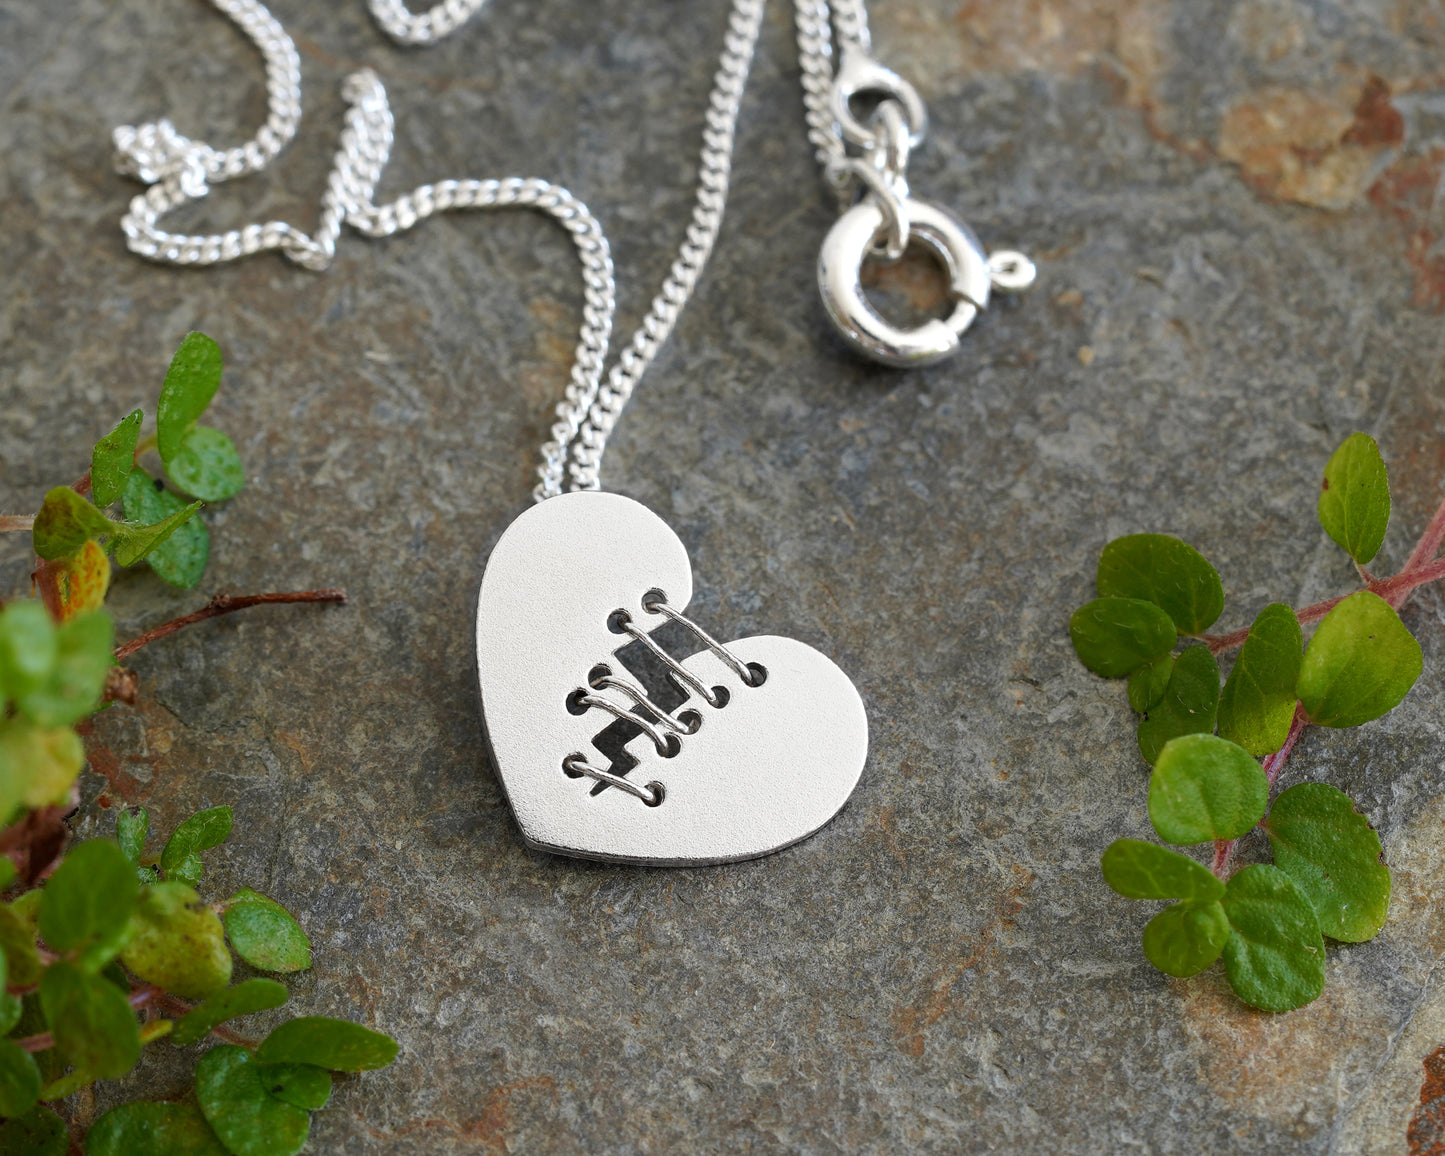 Mended Heart Necklace with Silver Sutures, Stitched Silver Heart Shape Necklace